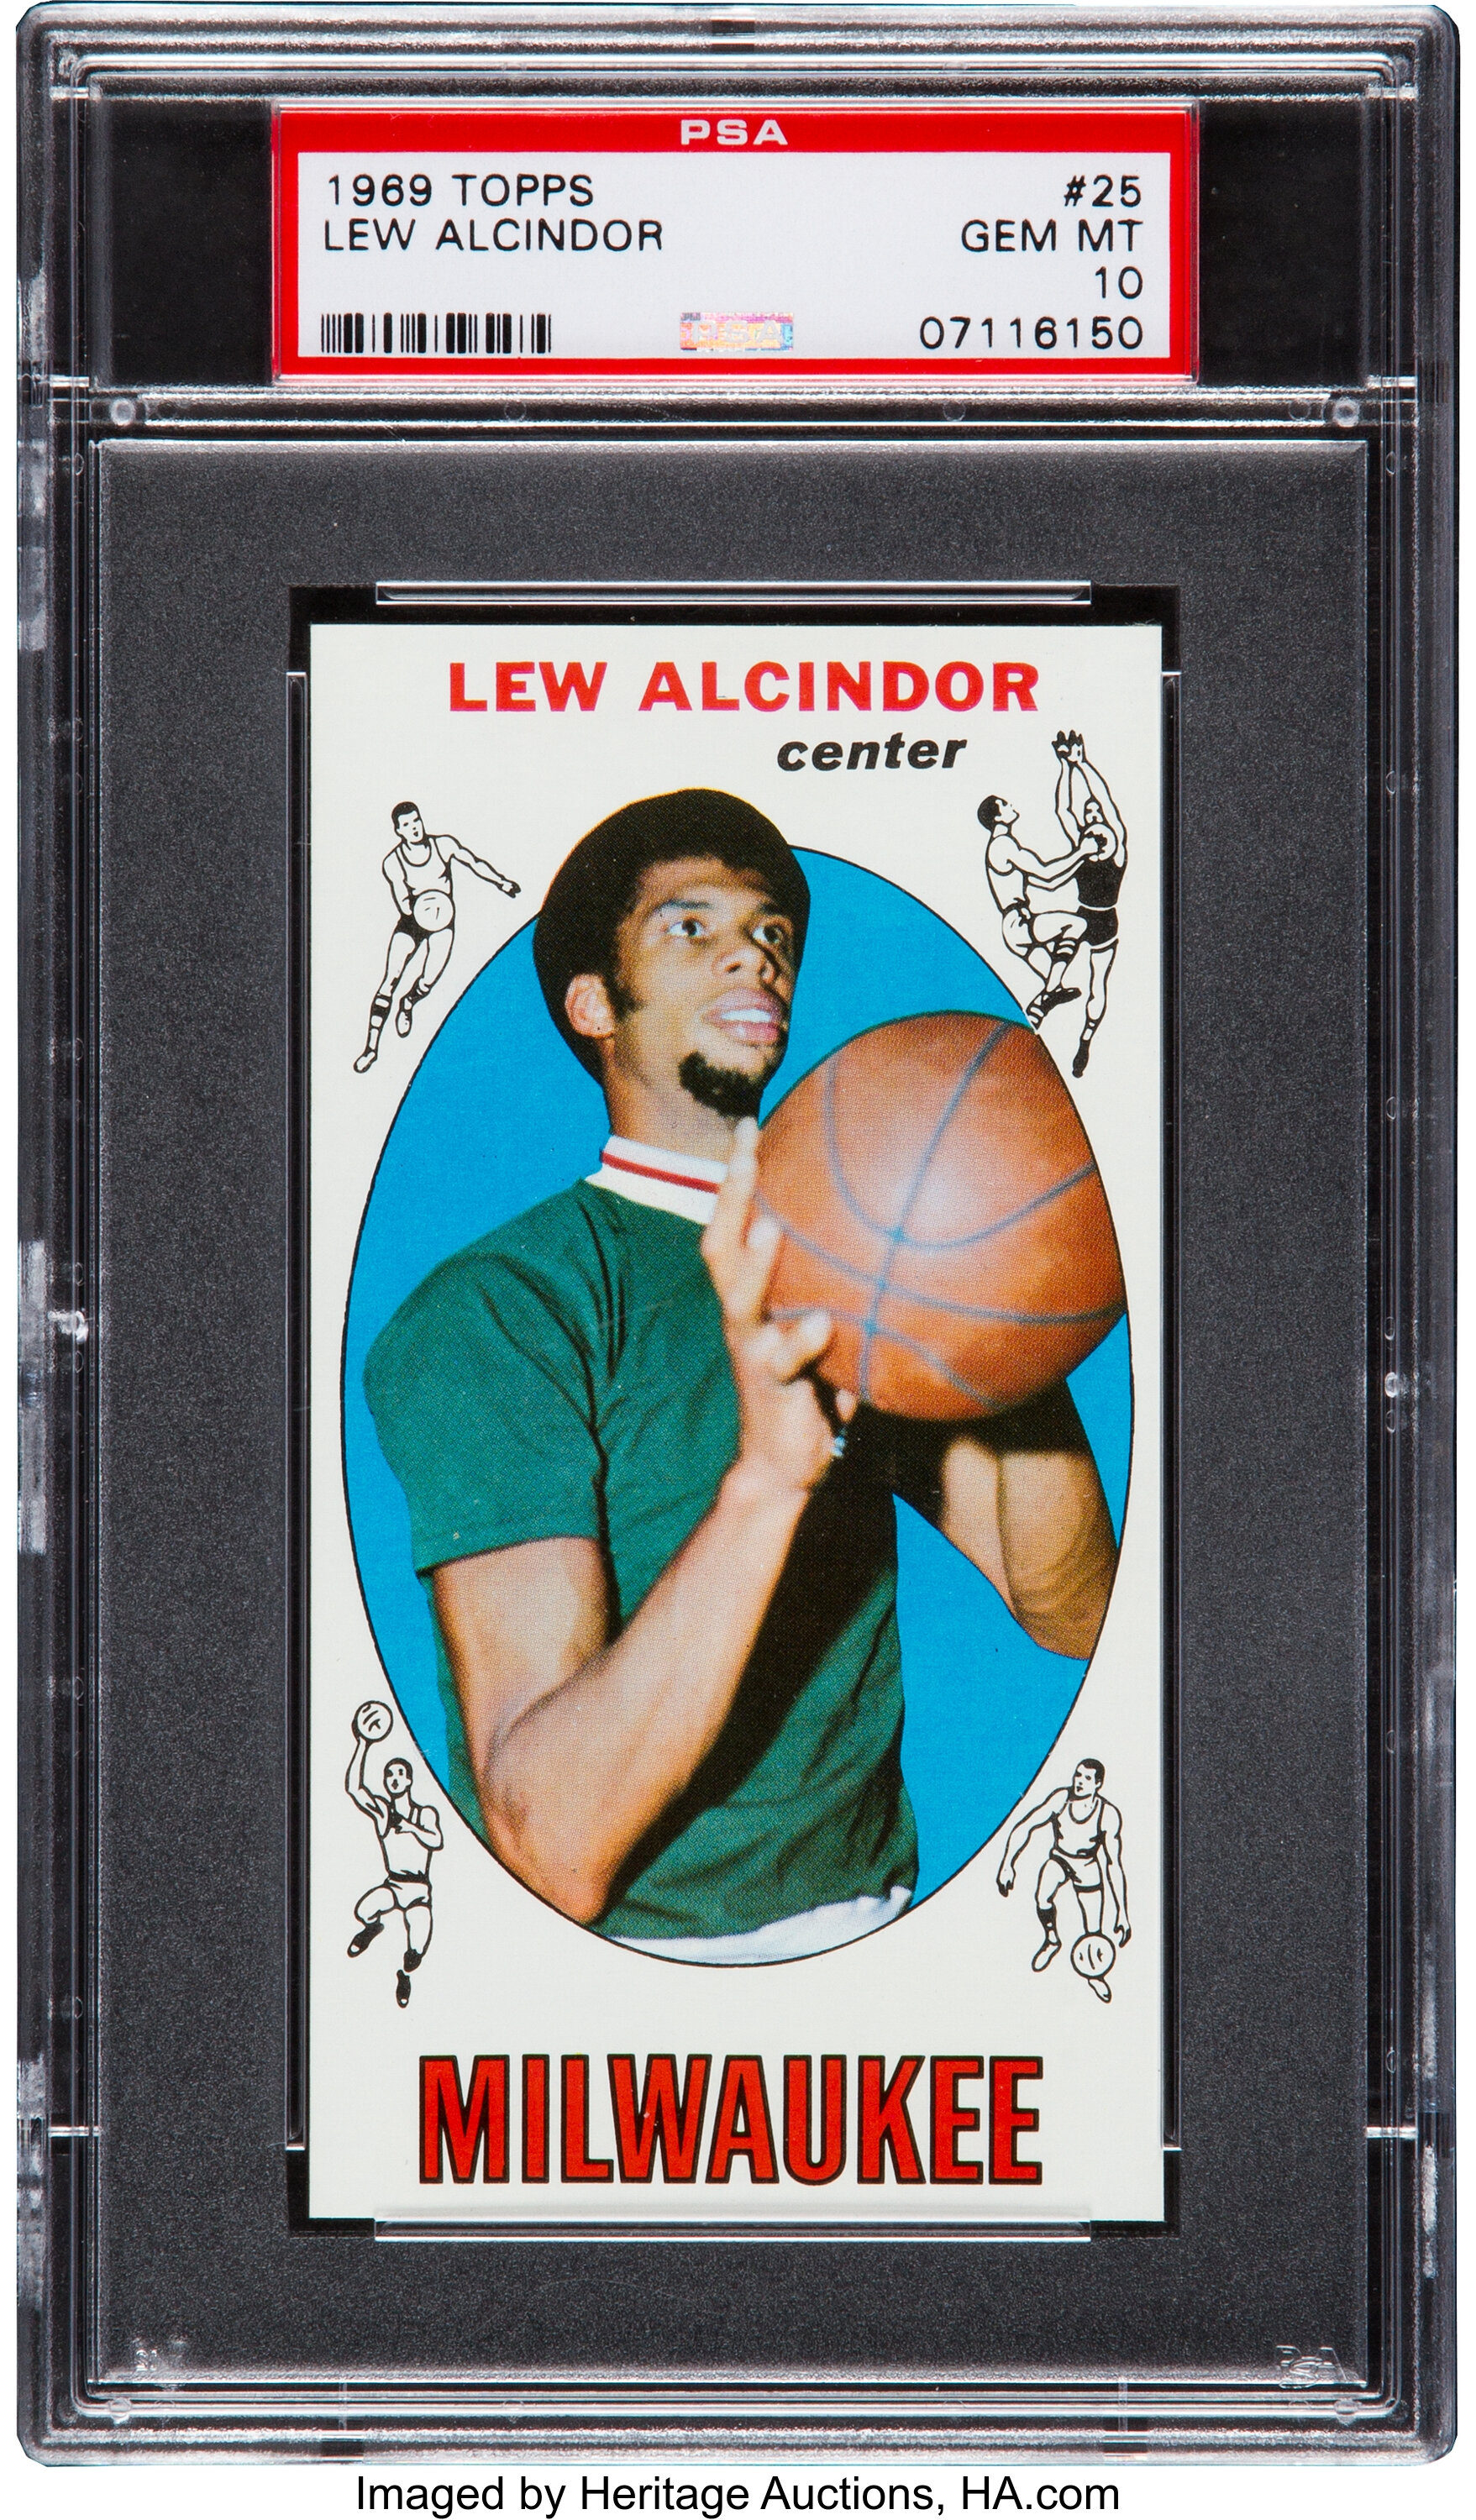 1969 Topps Lew Alcindor 25 Psa Gem Mint 10 Basketball Cards Lot 80077 Heritage Auctions